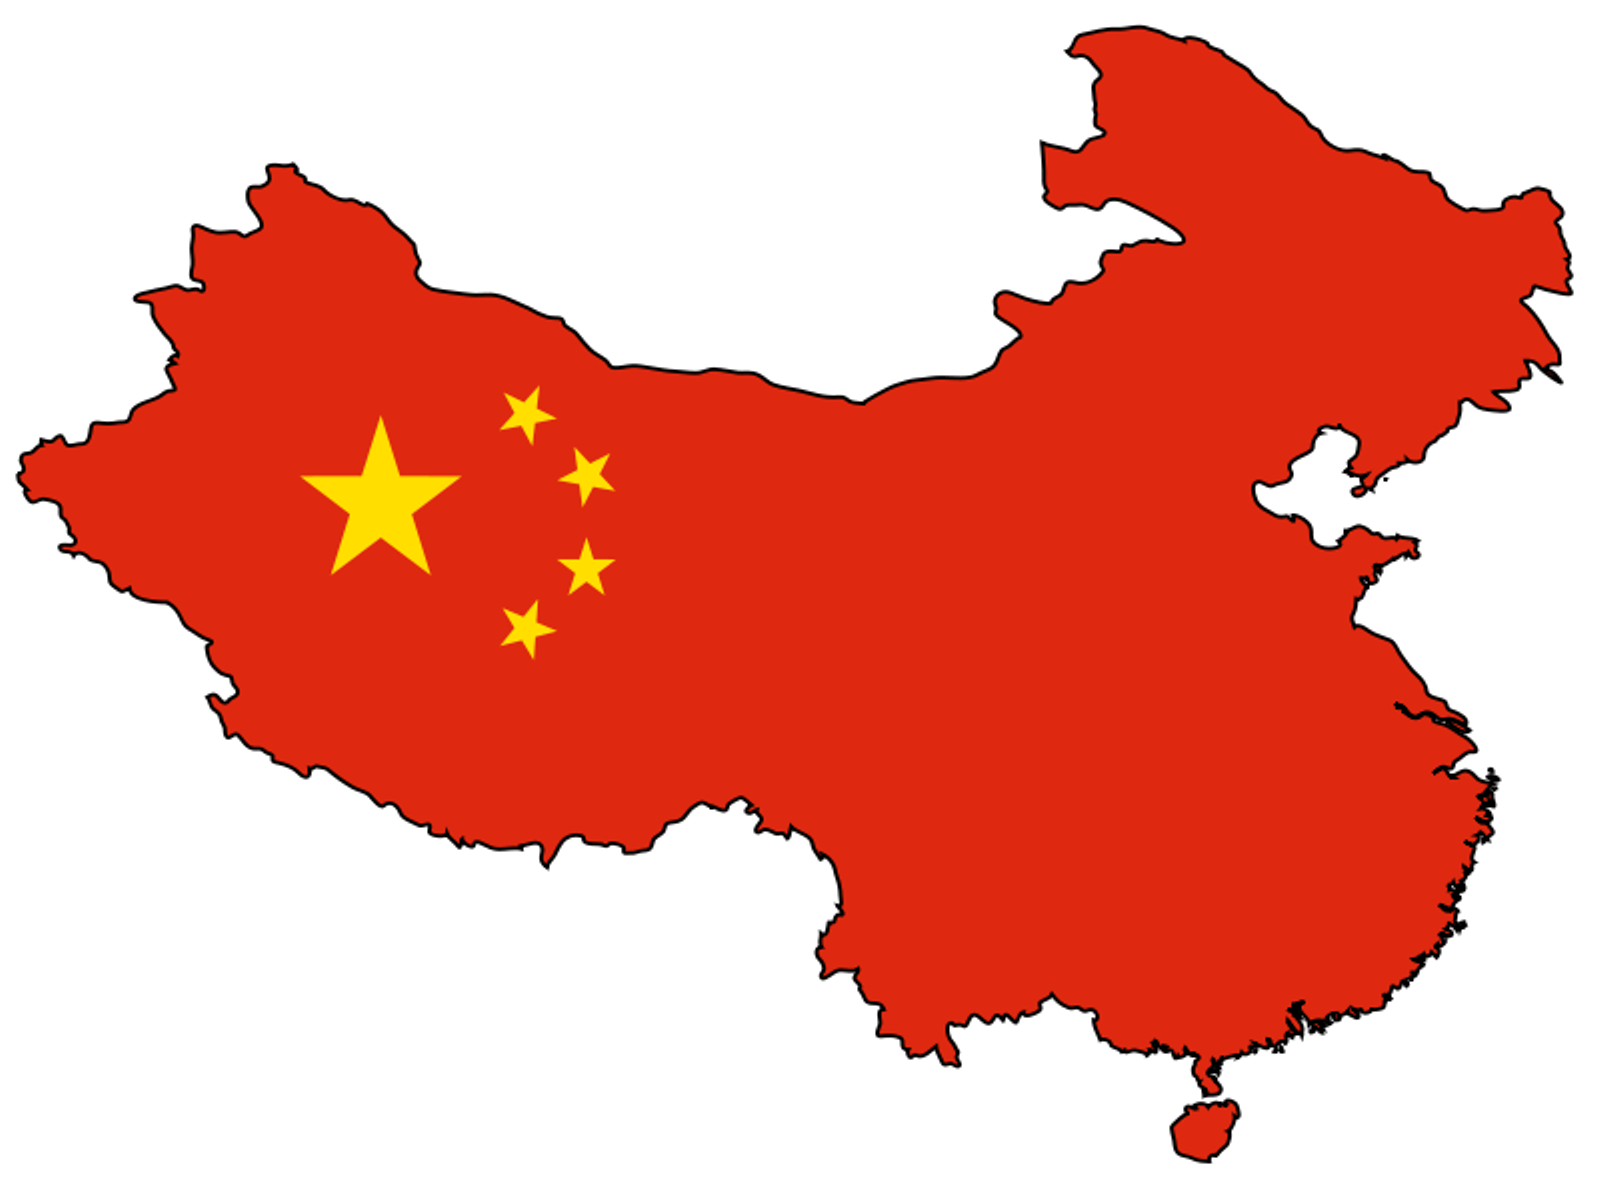 China Flag Map Wallpaper. Places to Visit. Flags